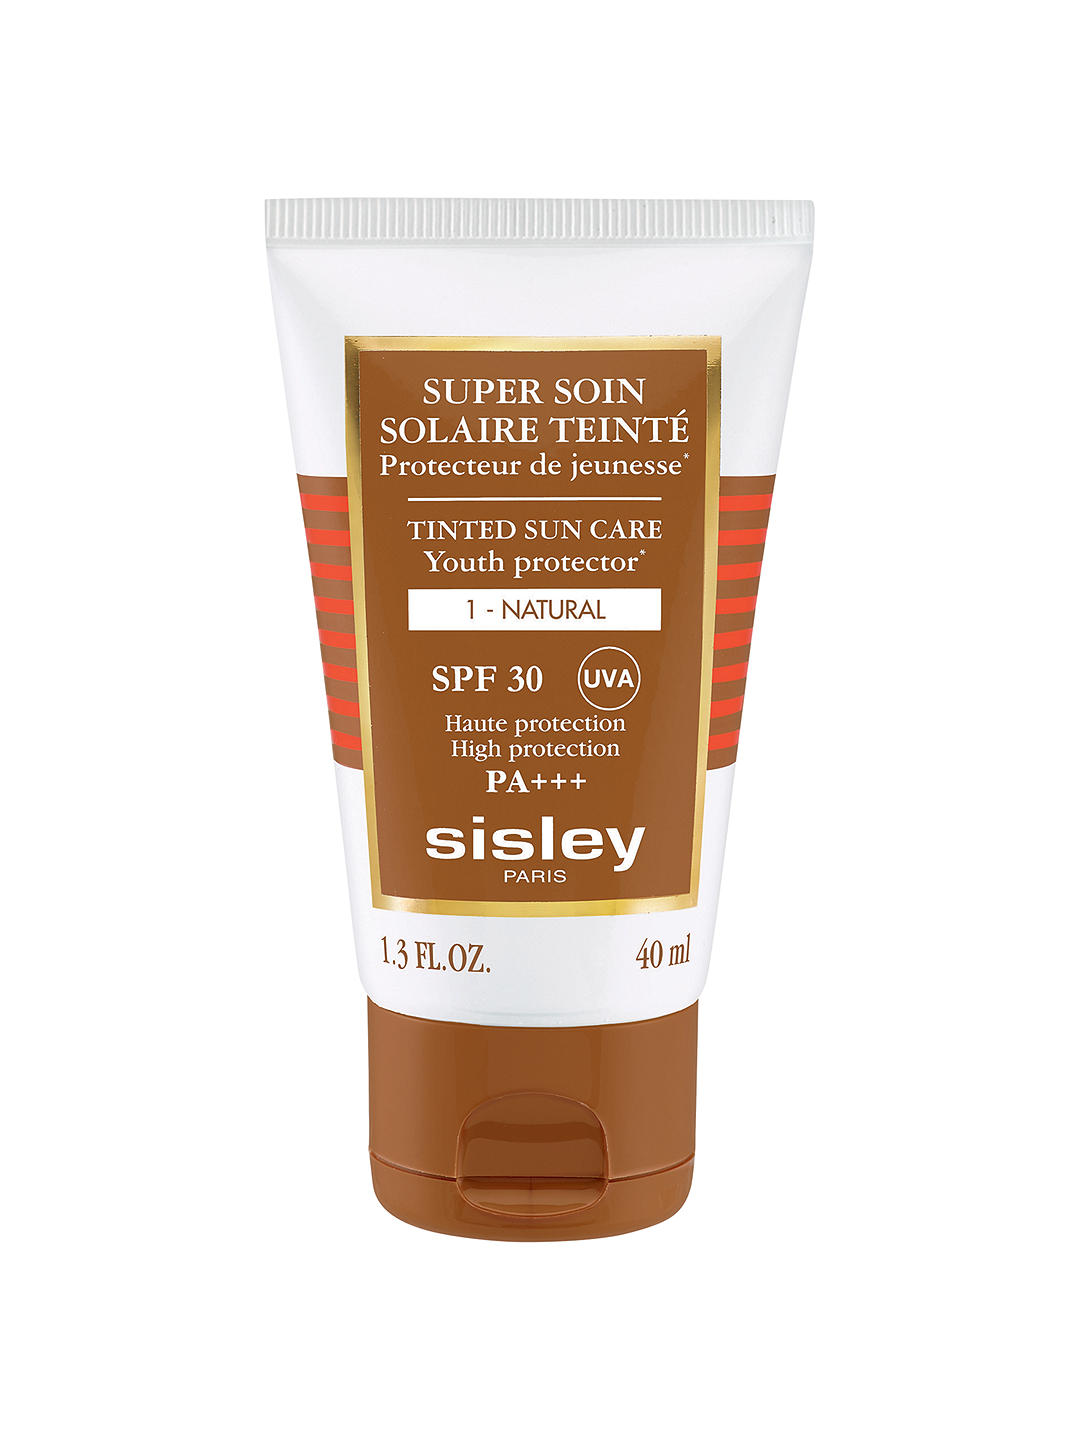 Sisley-Paris Super Soin Solaire Tinted Sun Care SPF 30, 1 Natural 1